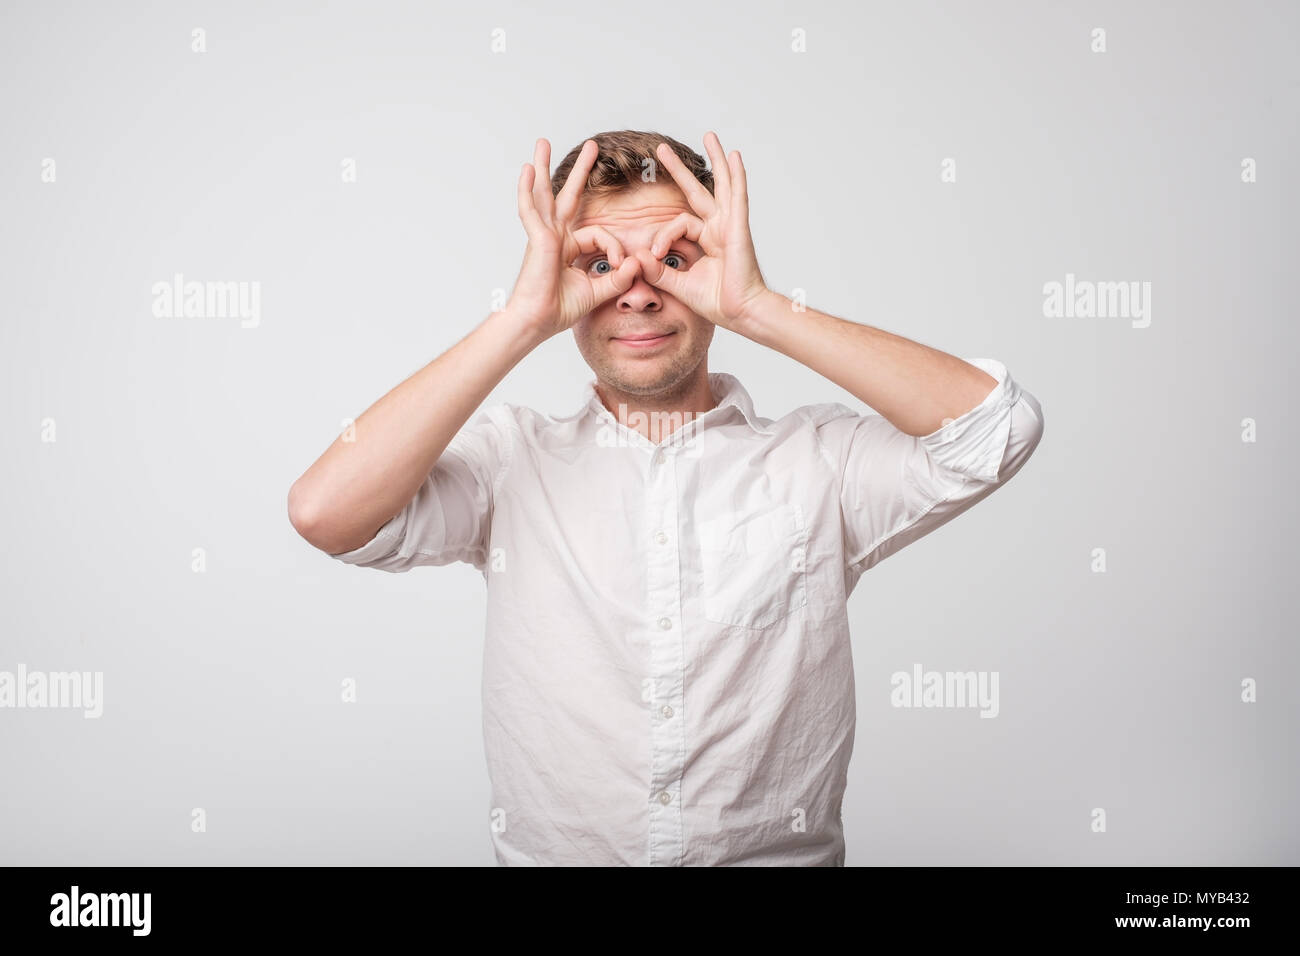 Caucasian man making sign of owl with hands. Stock Photo